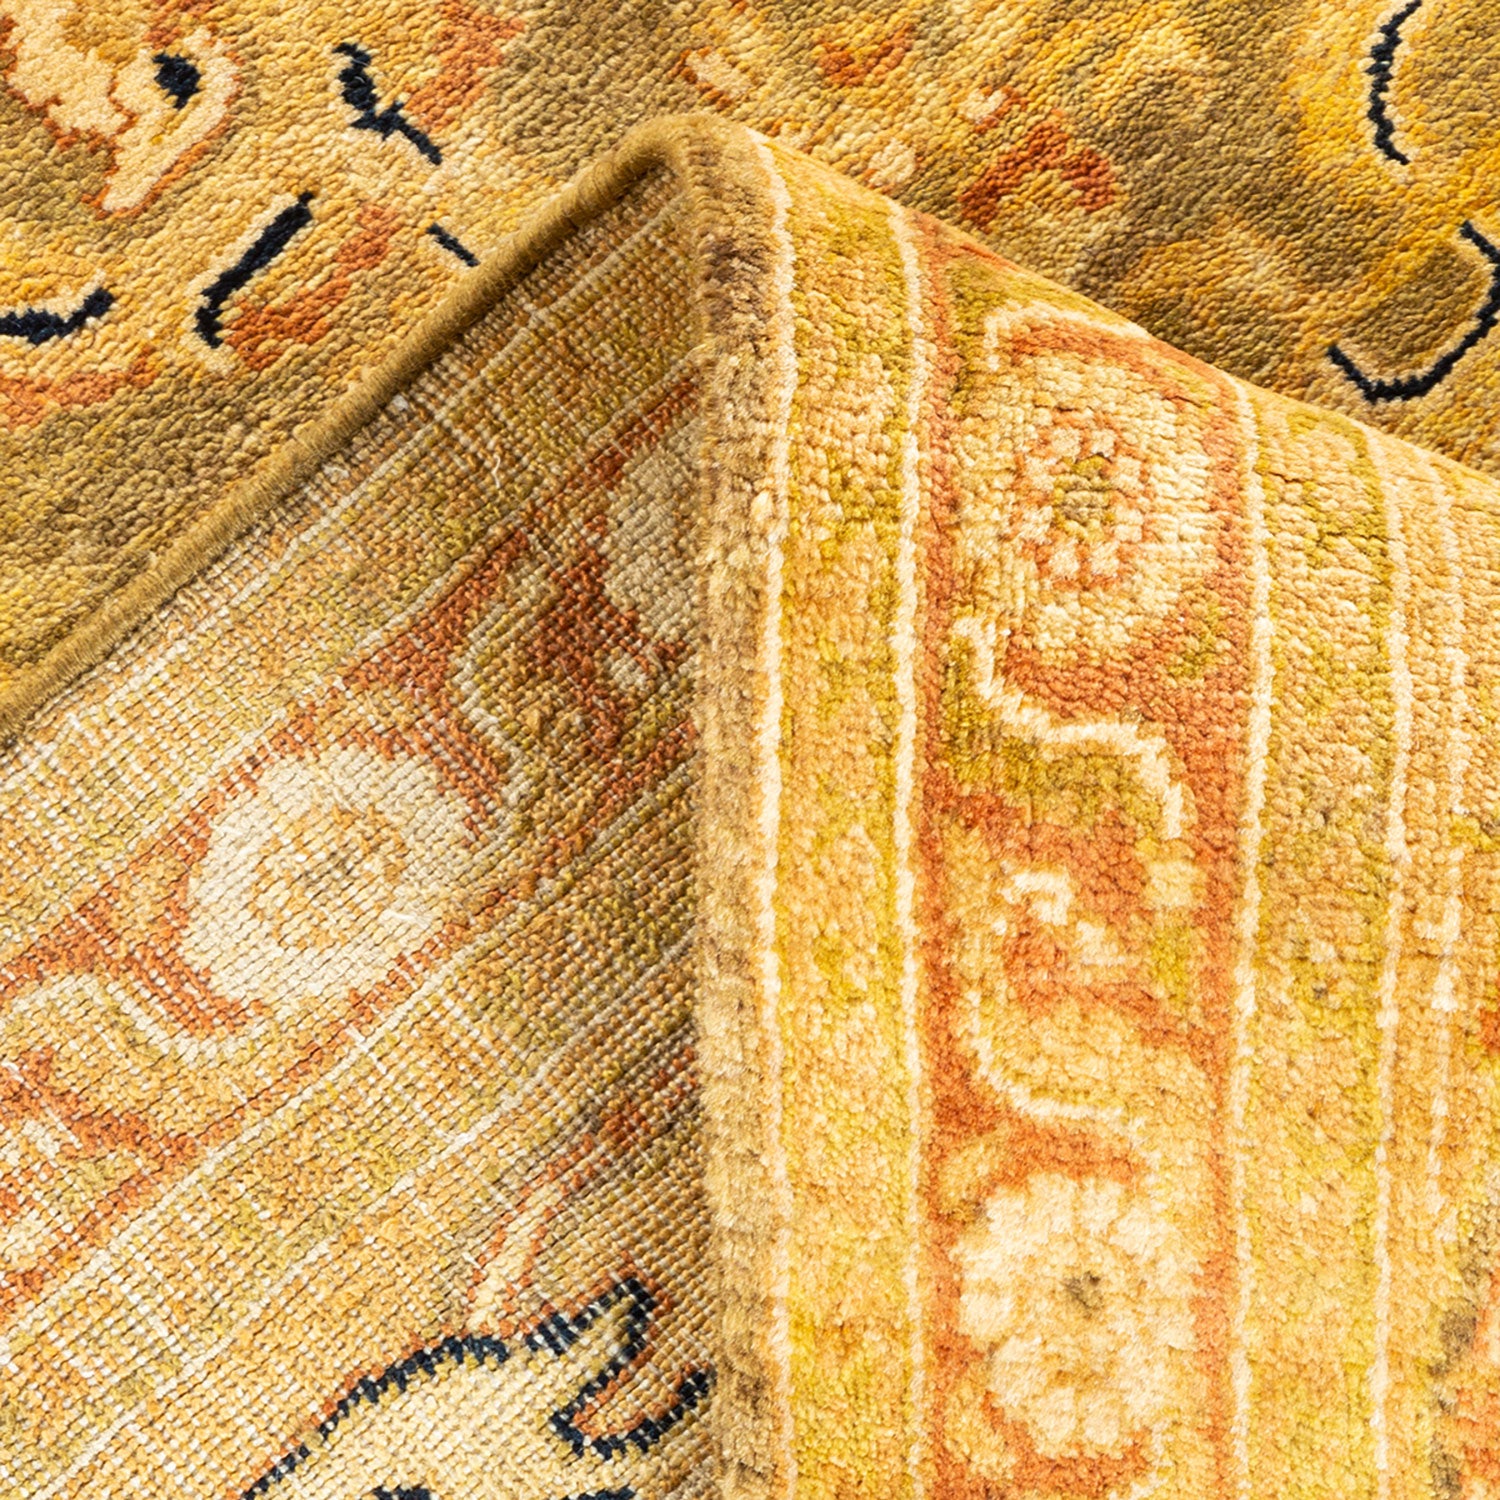 Intricate patterned rug showcases rich golden hues and plush texture.